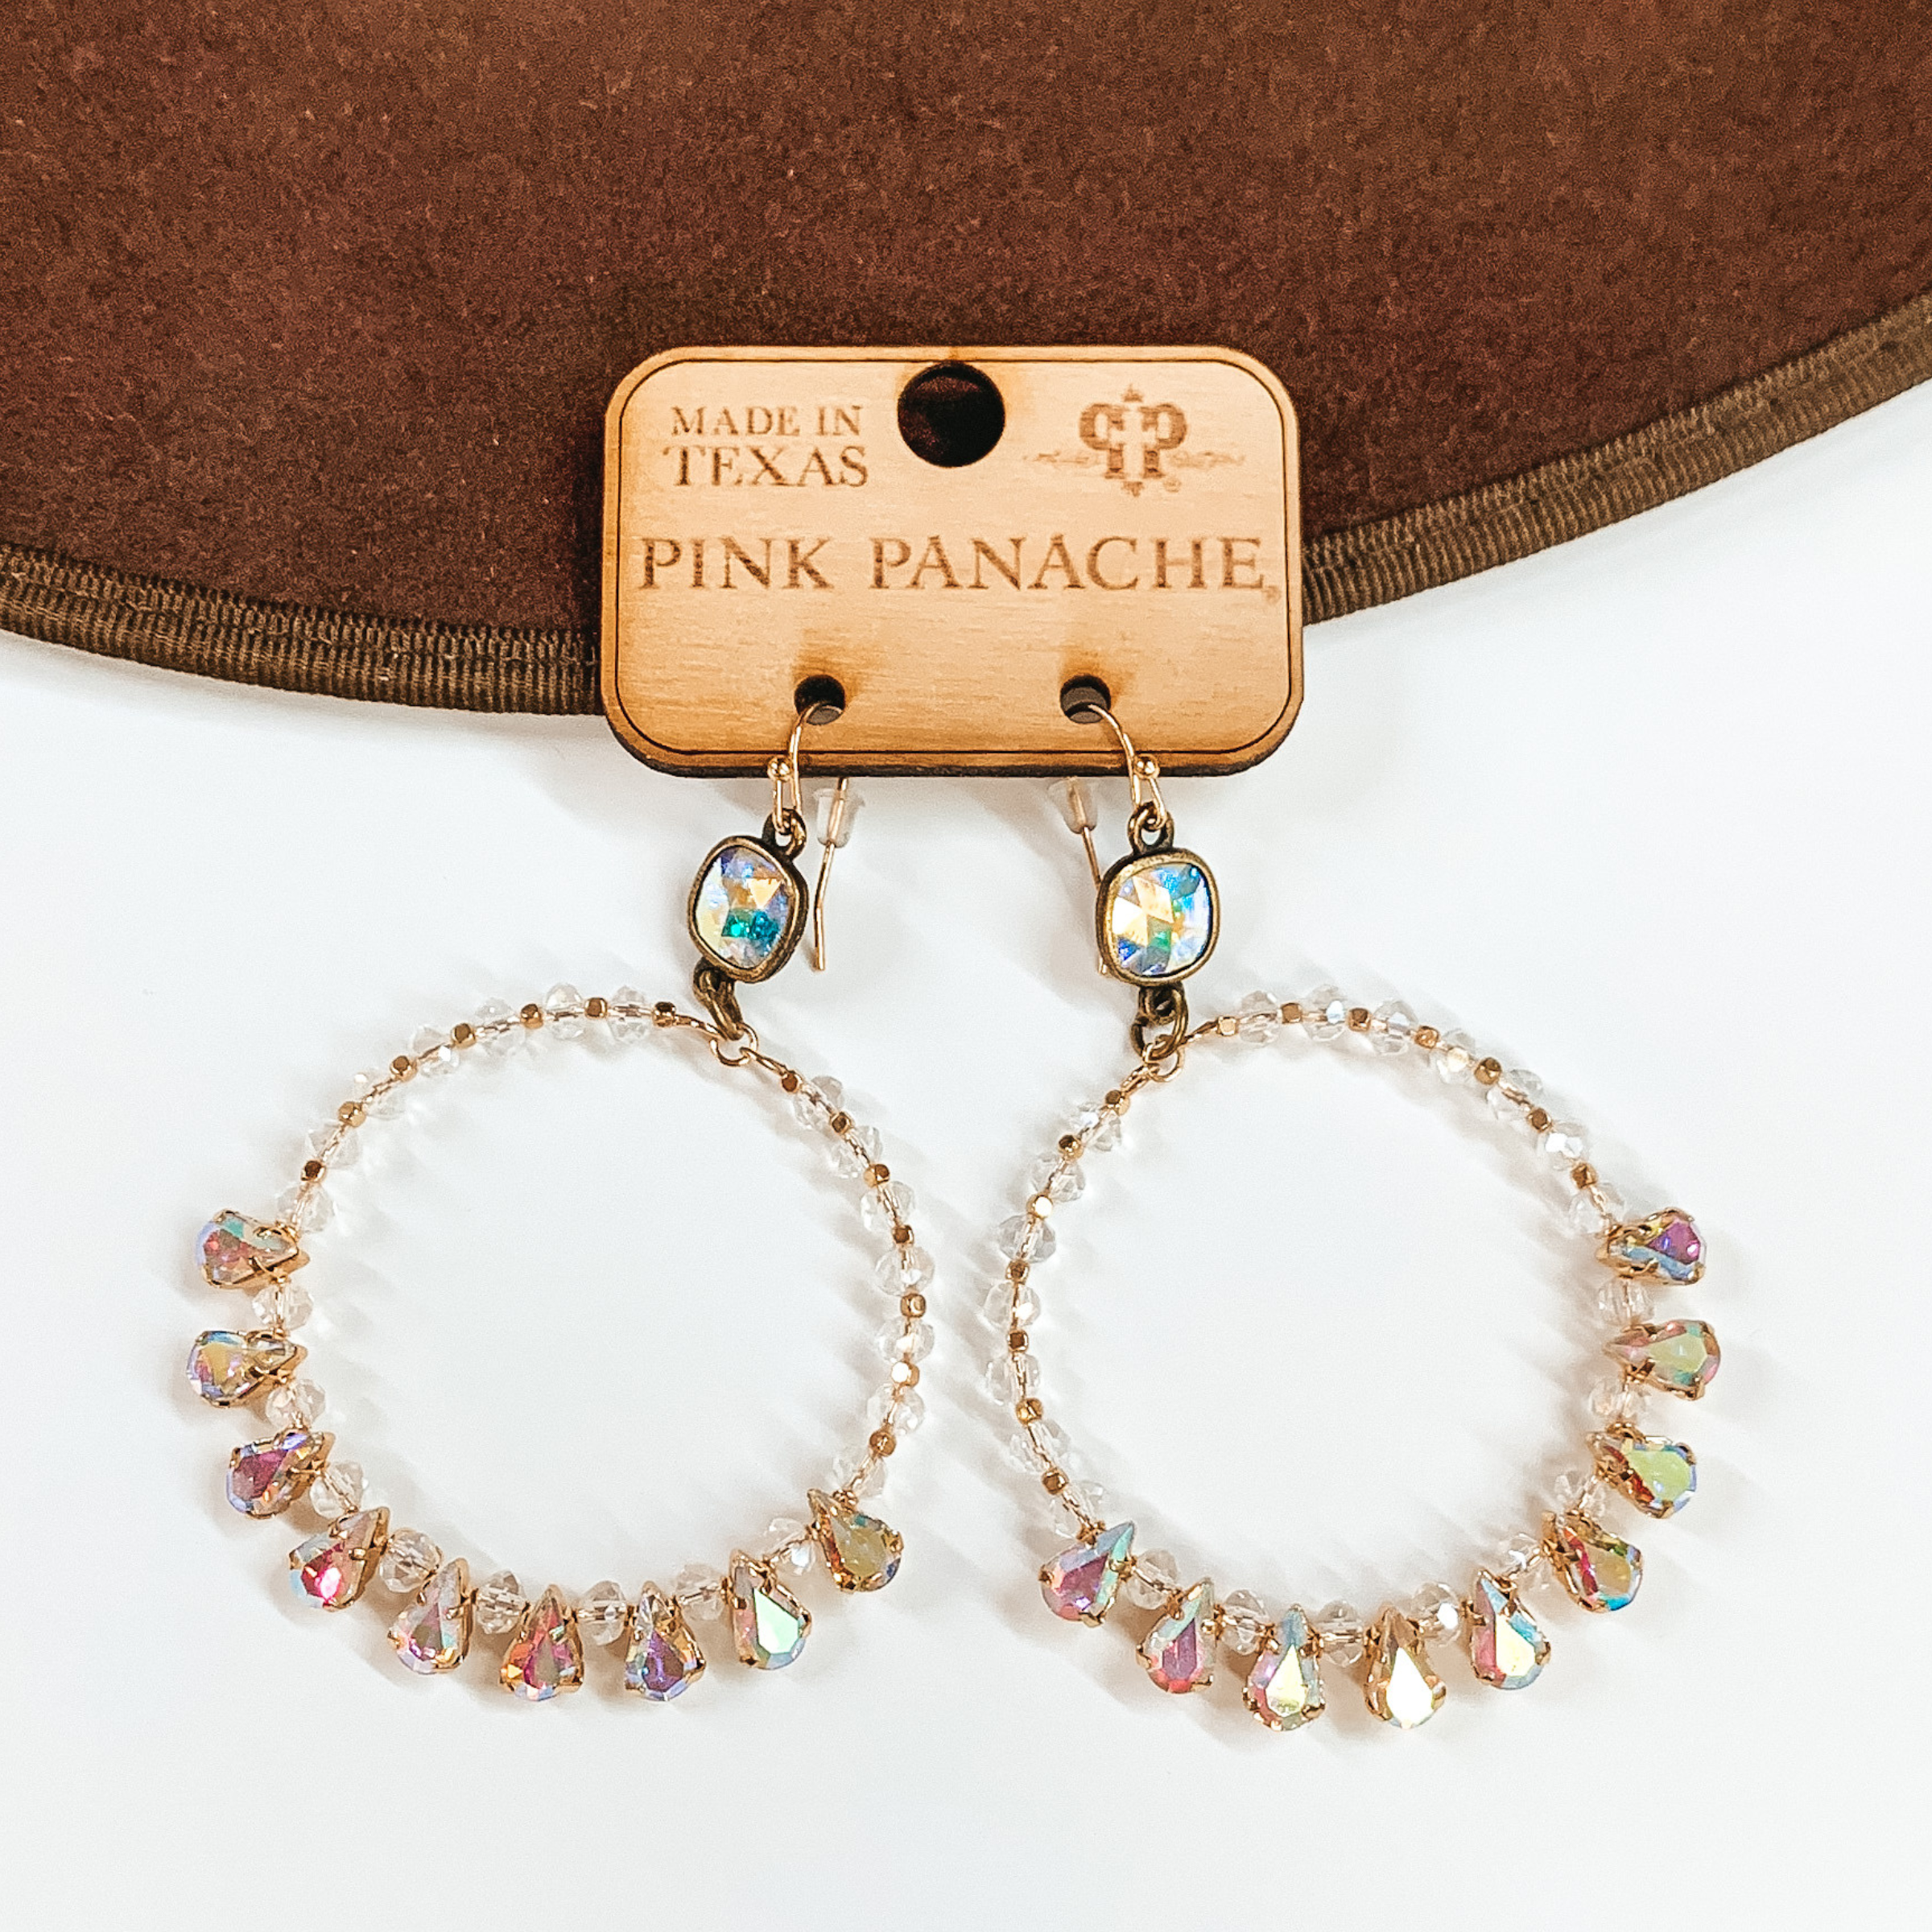 Pictured is a pair of large, circle hoop earrings. These earrings include gold fish hook earrings, ab cushion cut crystal connectors, and the hoop has gold, clear, and ab crystals. These earrings are pictured laying partially on a brown hat brim on a white background.  